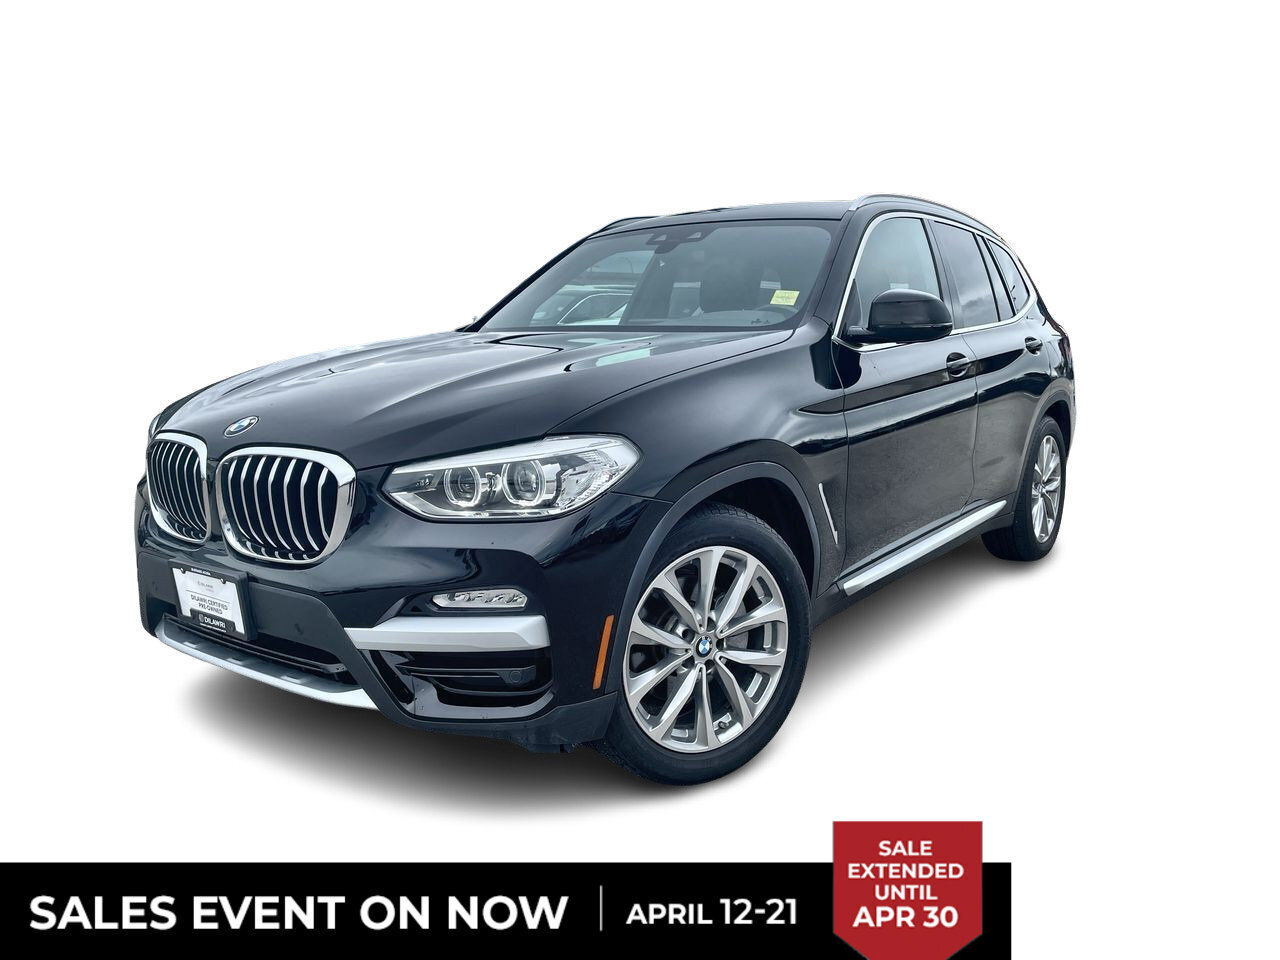 2019 BMW X3 XDrive30i | Premium Package | Low KMs | Local |